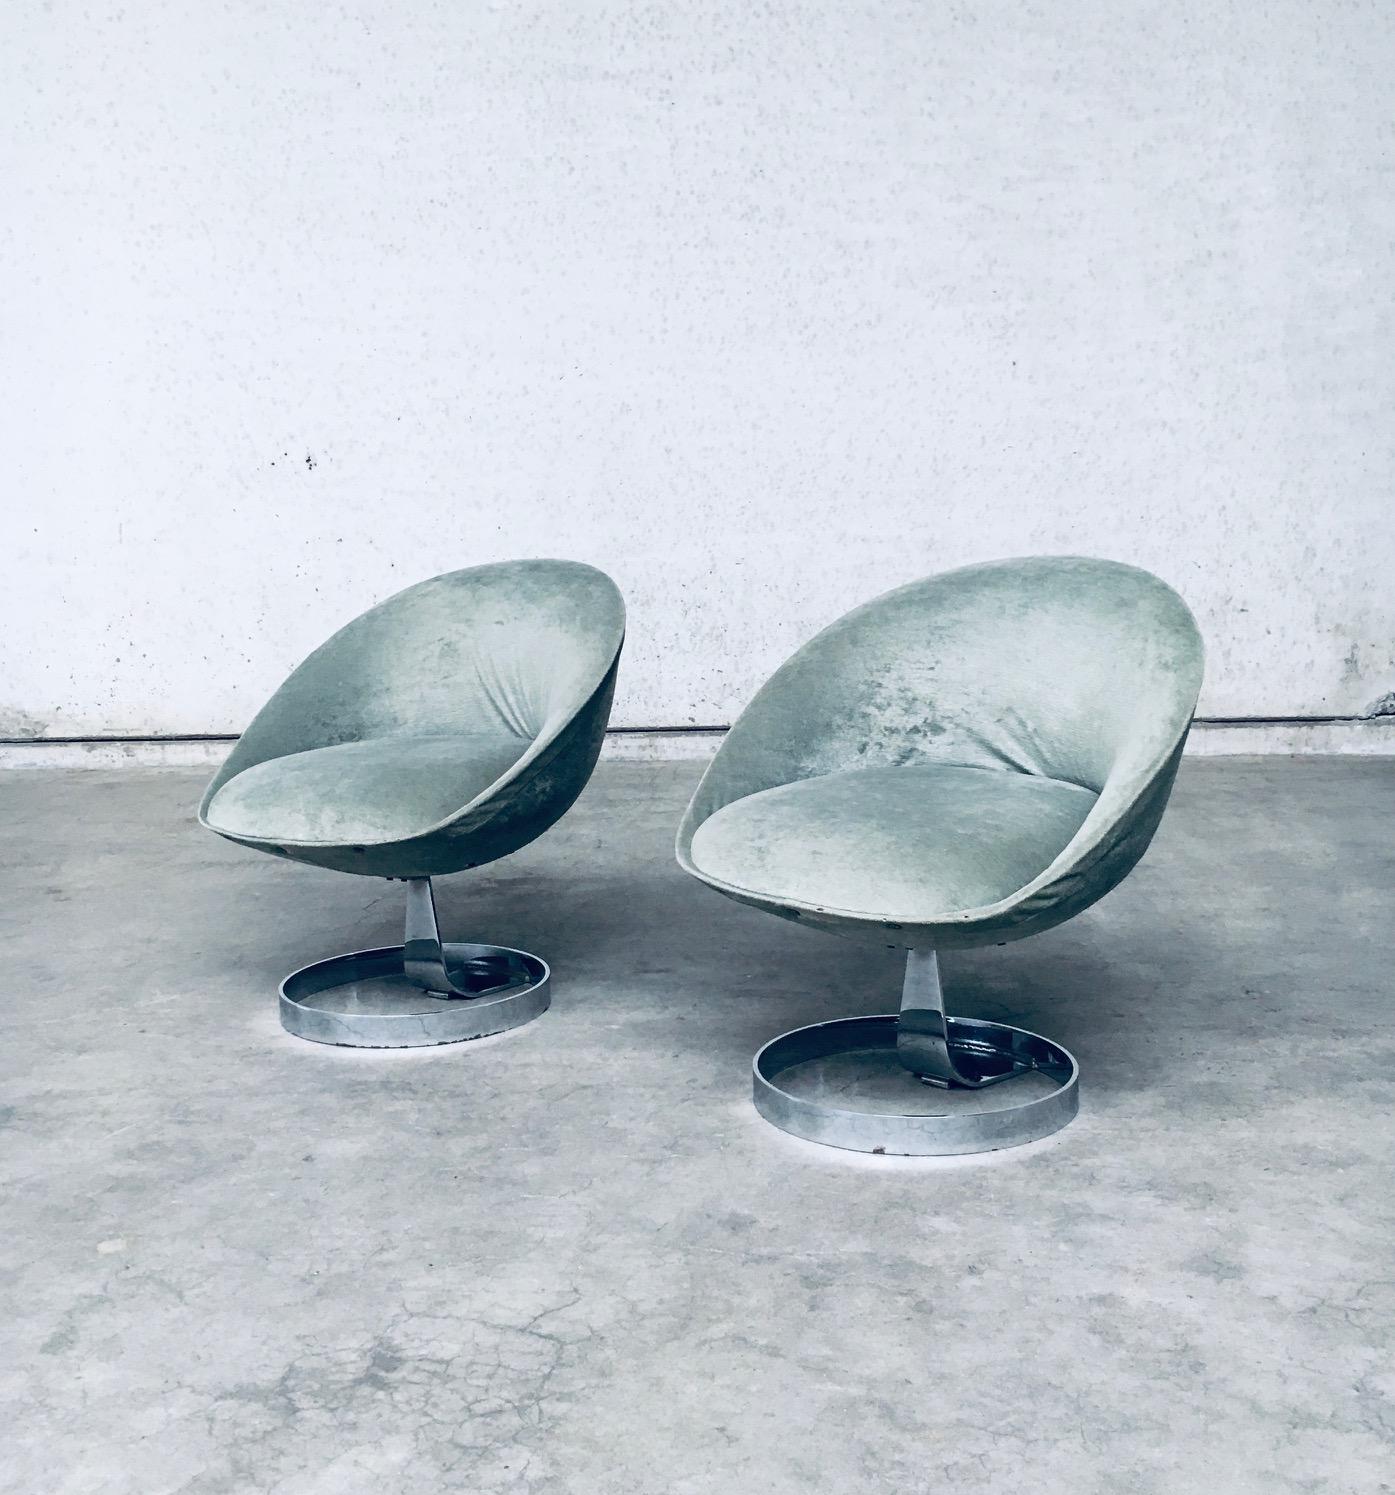 Vintage Midcentury Modern French Space Age Atomic Design 'SPHERE POD' Lounge Chair set of 2. Made in France, 1960's period. In the style of Boris Tabacoff. Metal constructed chromed base and pod with green grey coverd fabric. A very nice designed